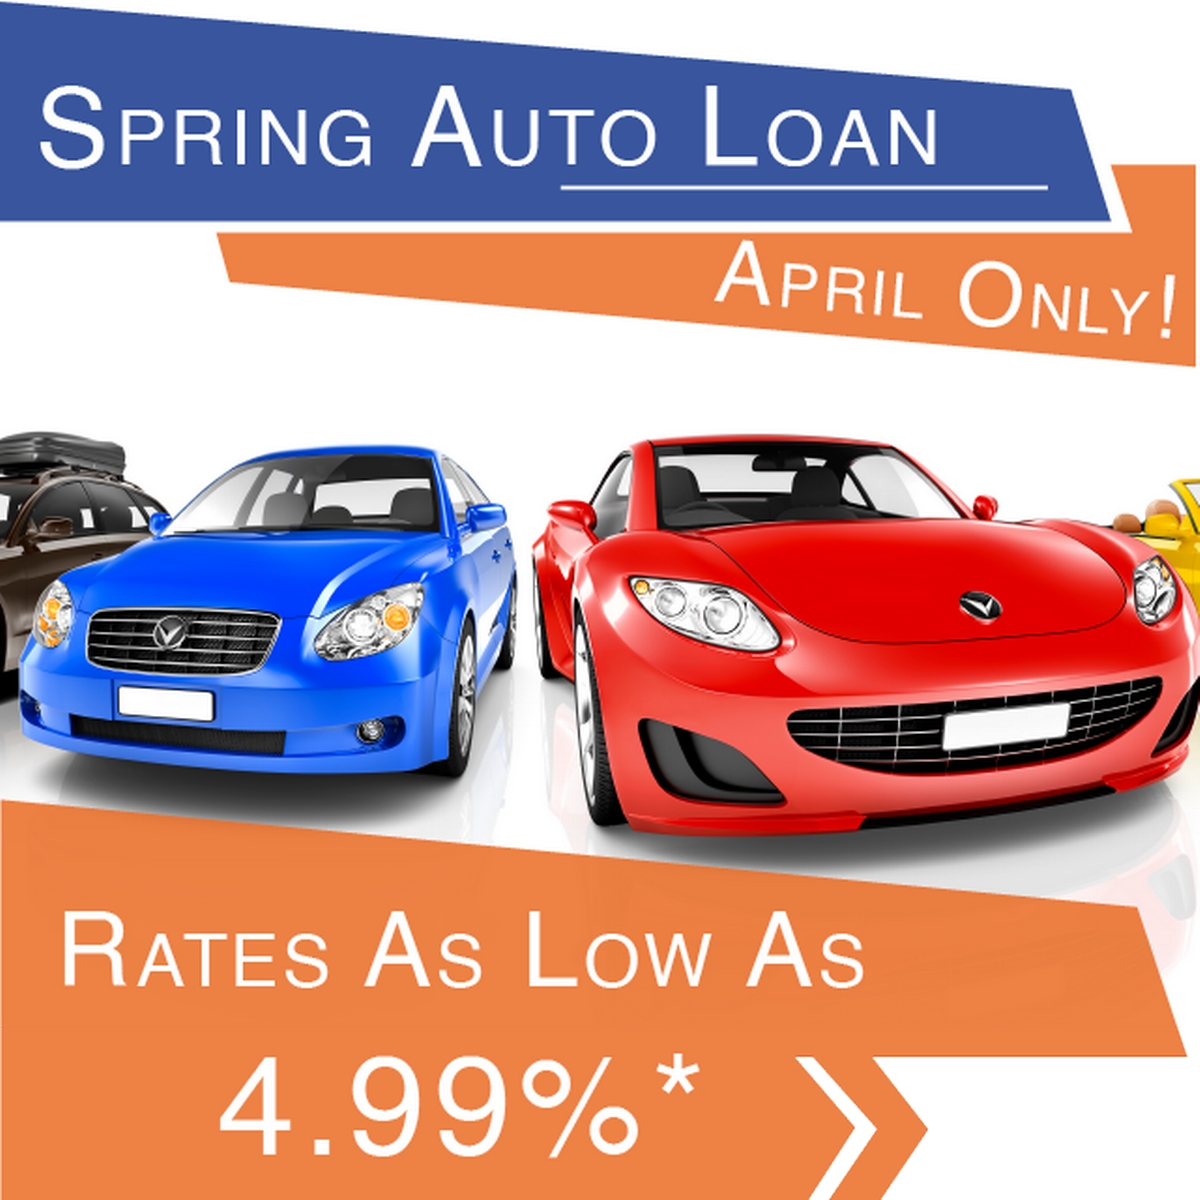 Spring Auto Loan, April only! Rates as low as 4.99%